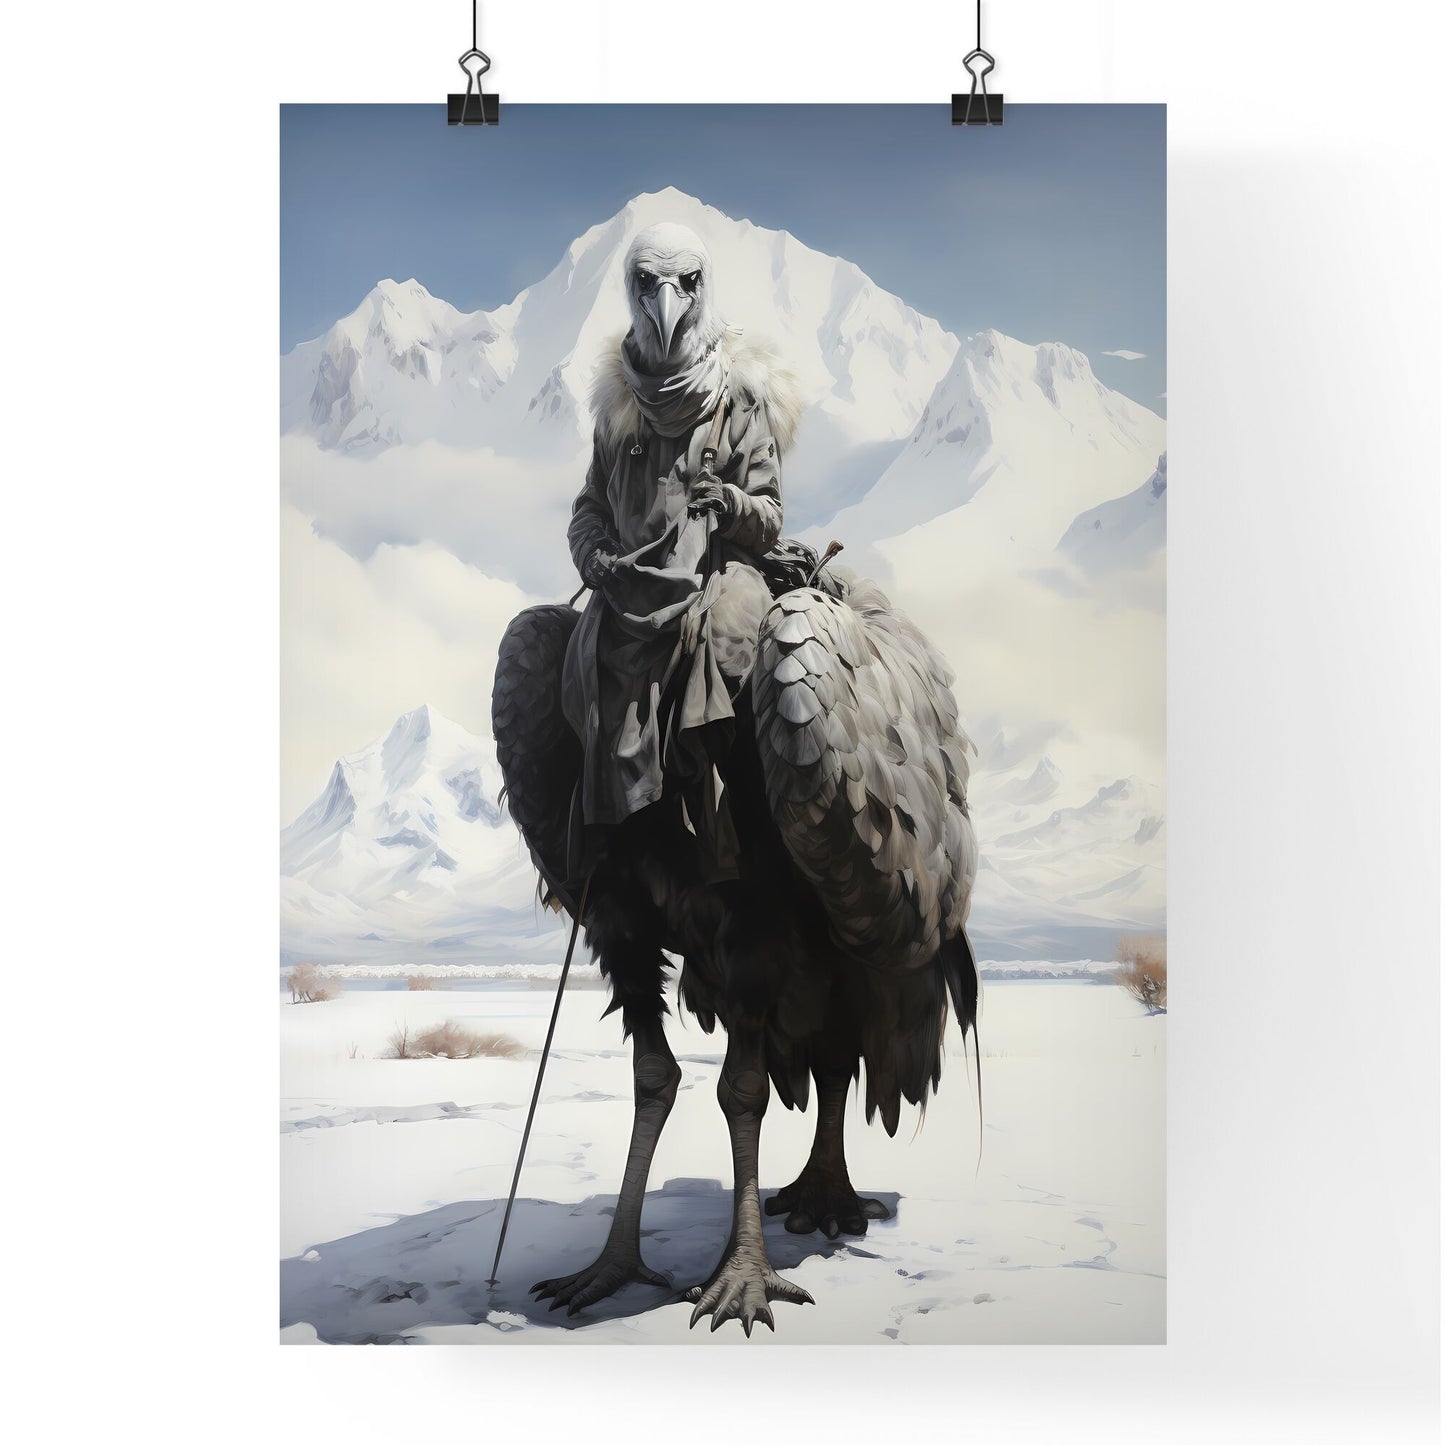 A Poster of A rider on a large ostrich - A Person Riding A Bird With A Large Bird Head Default Title